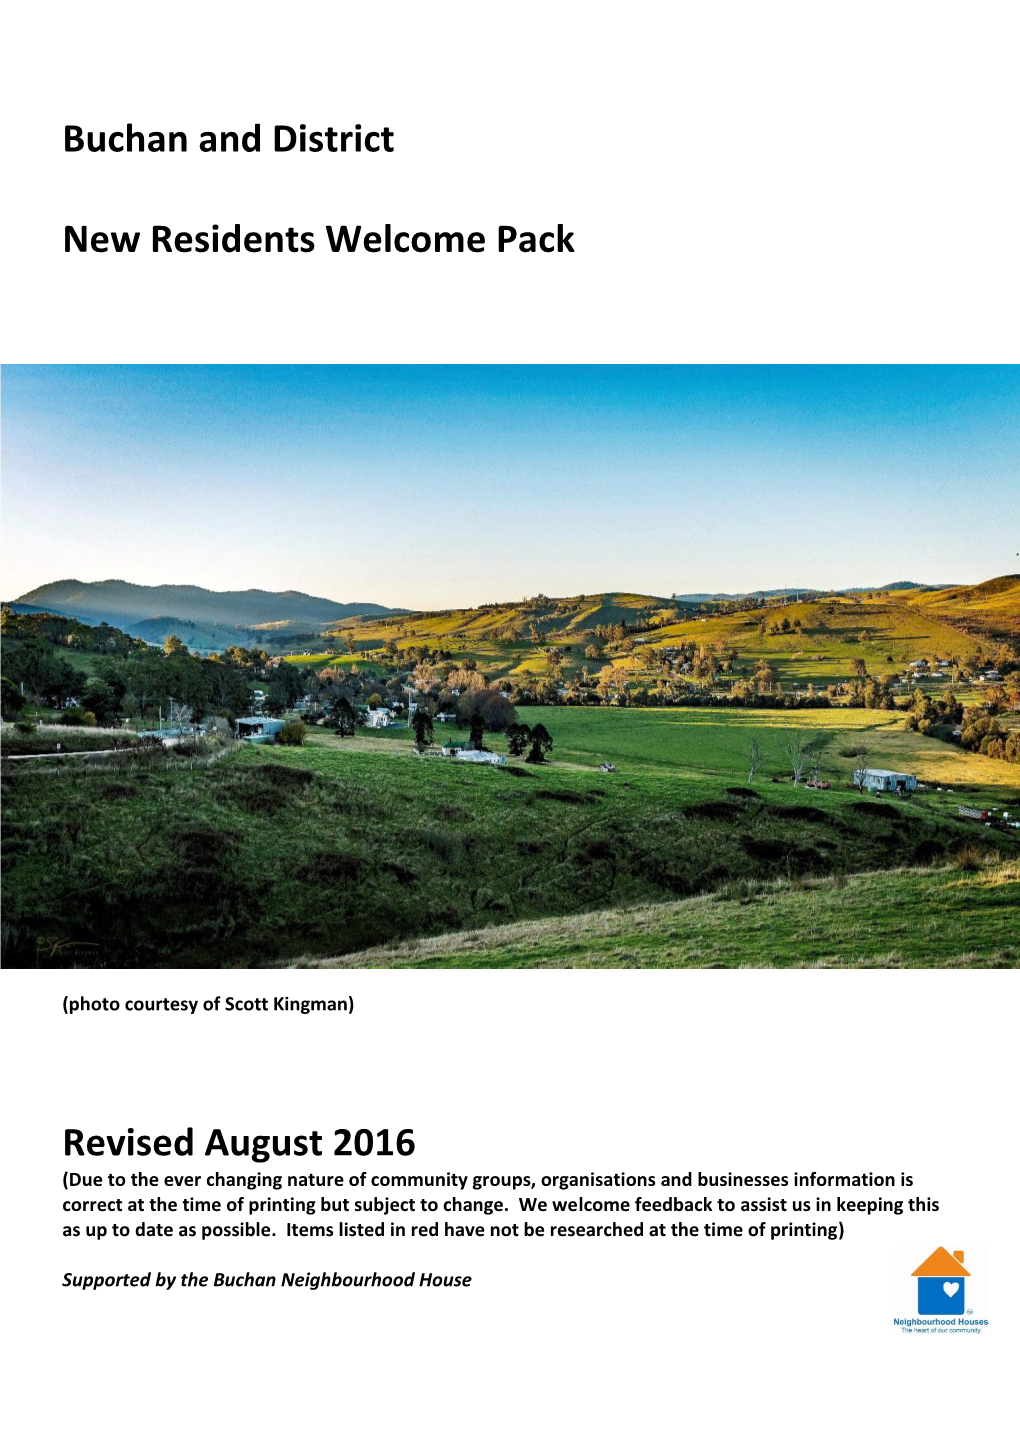 Buchan and District New Residents Welcome Pack Revised August 2016